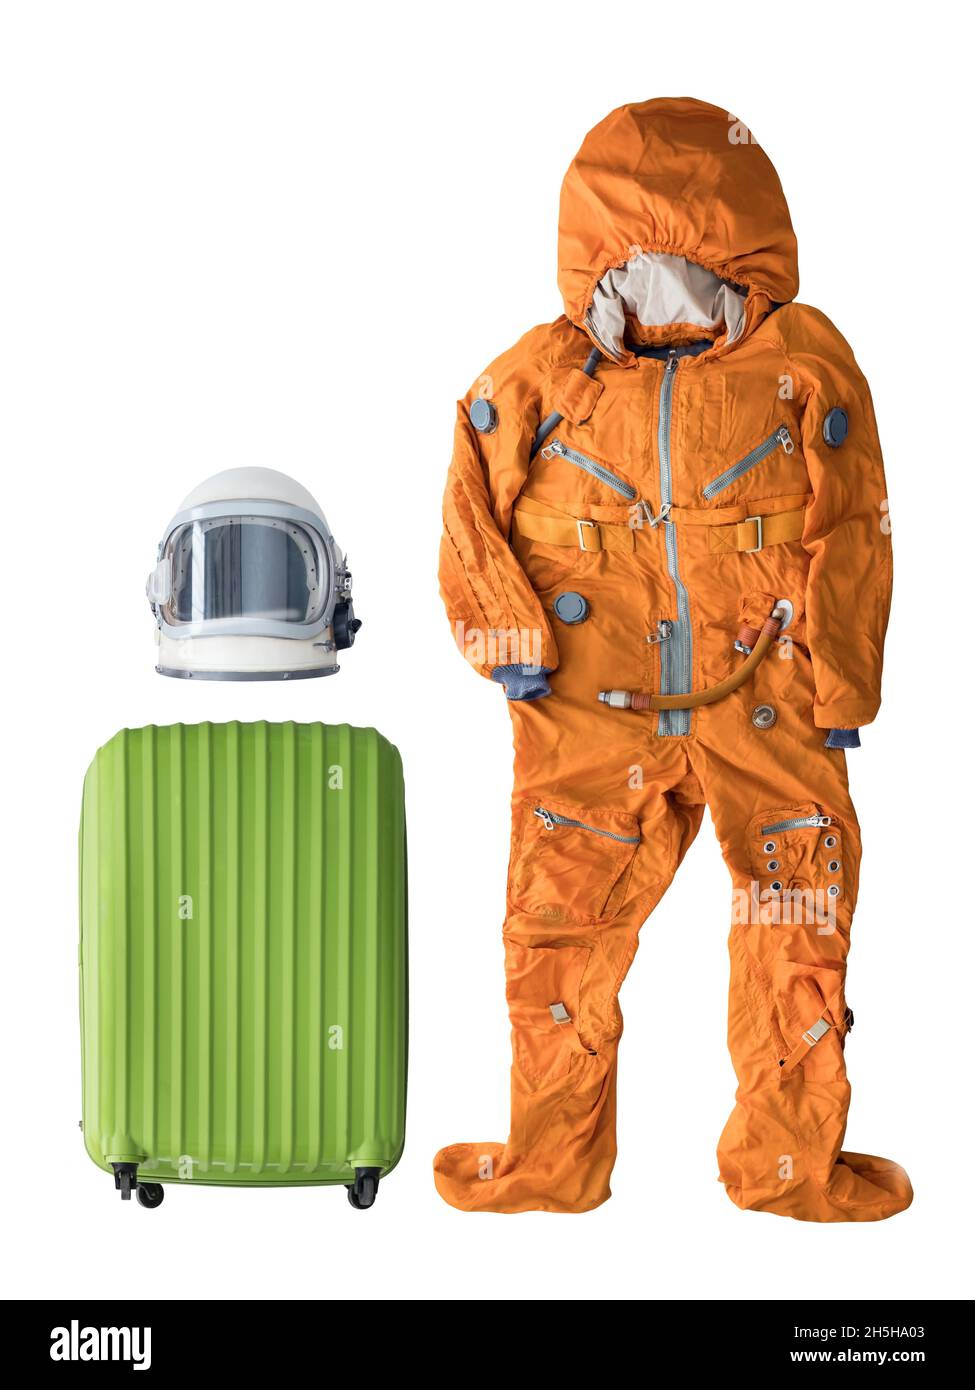 Flat lay of astronaut orange space suit, space helmet and astronaut space suit accessories isolated on white background Stock Photo